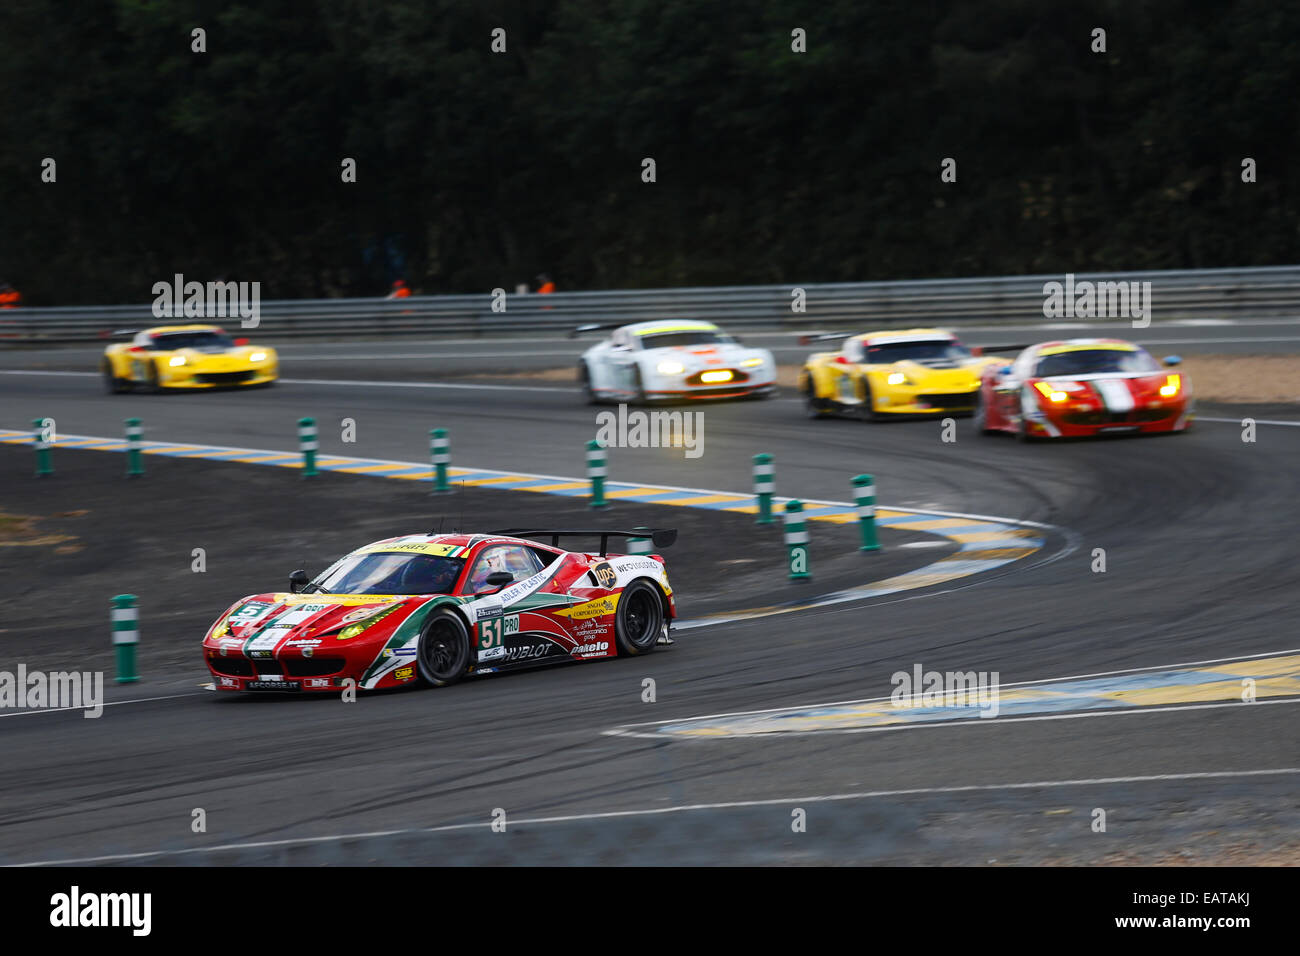 Ferrari 458 Italia pulling away from competition at Le Mans 24H race in Mulsanne corner Stock Photo